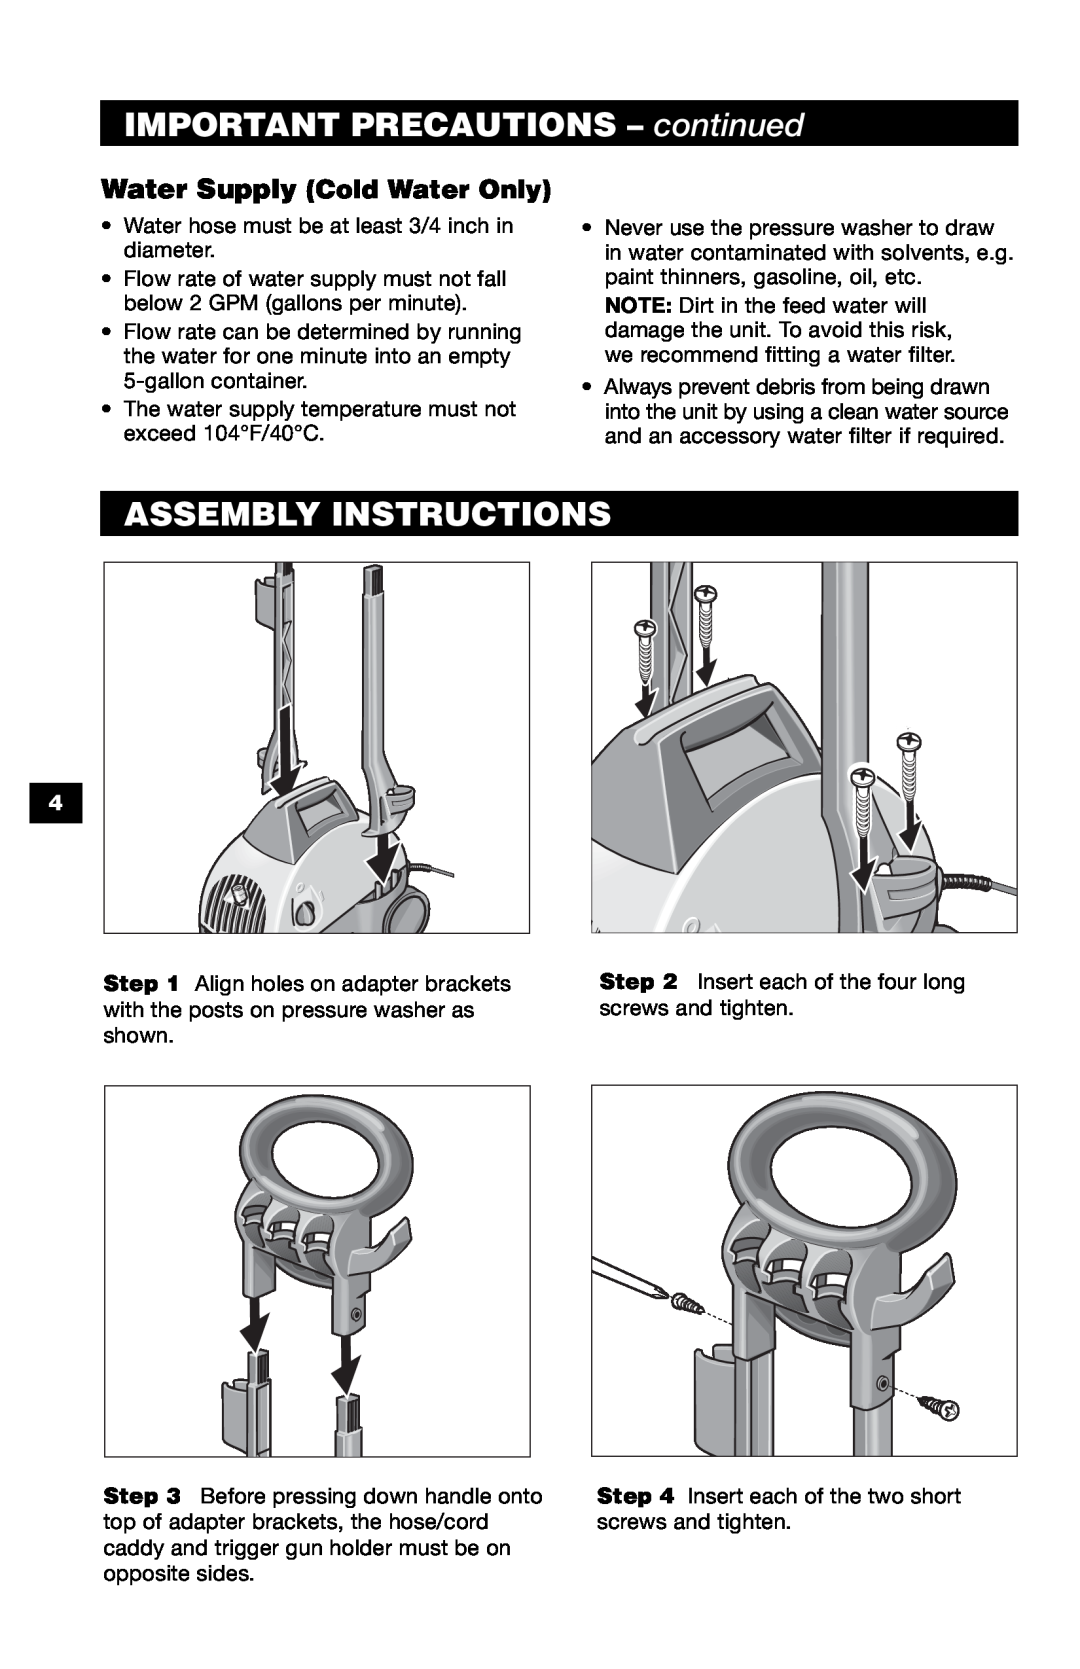 Karcher K 320 M specifications IMPORTANT PRECAUTIONS - continued, Assembly Instructions, Water Supply Cold Water Only 